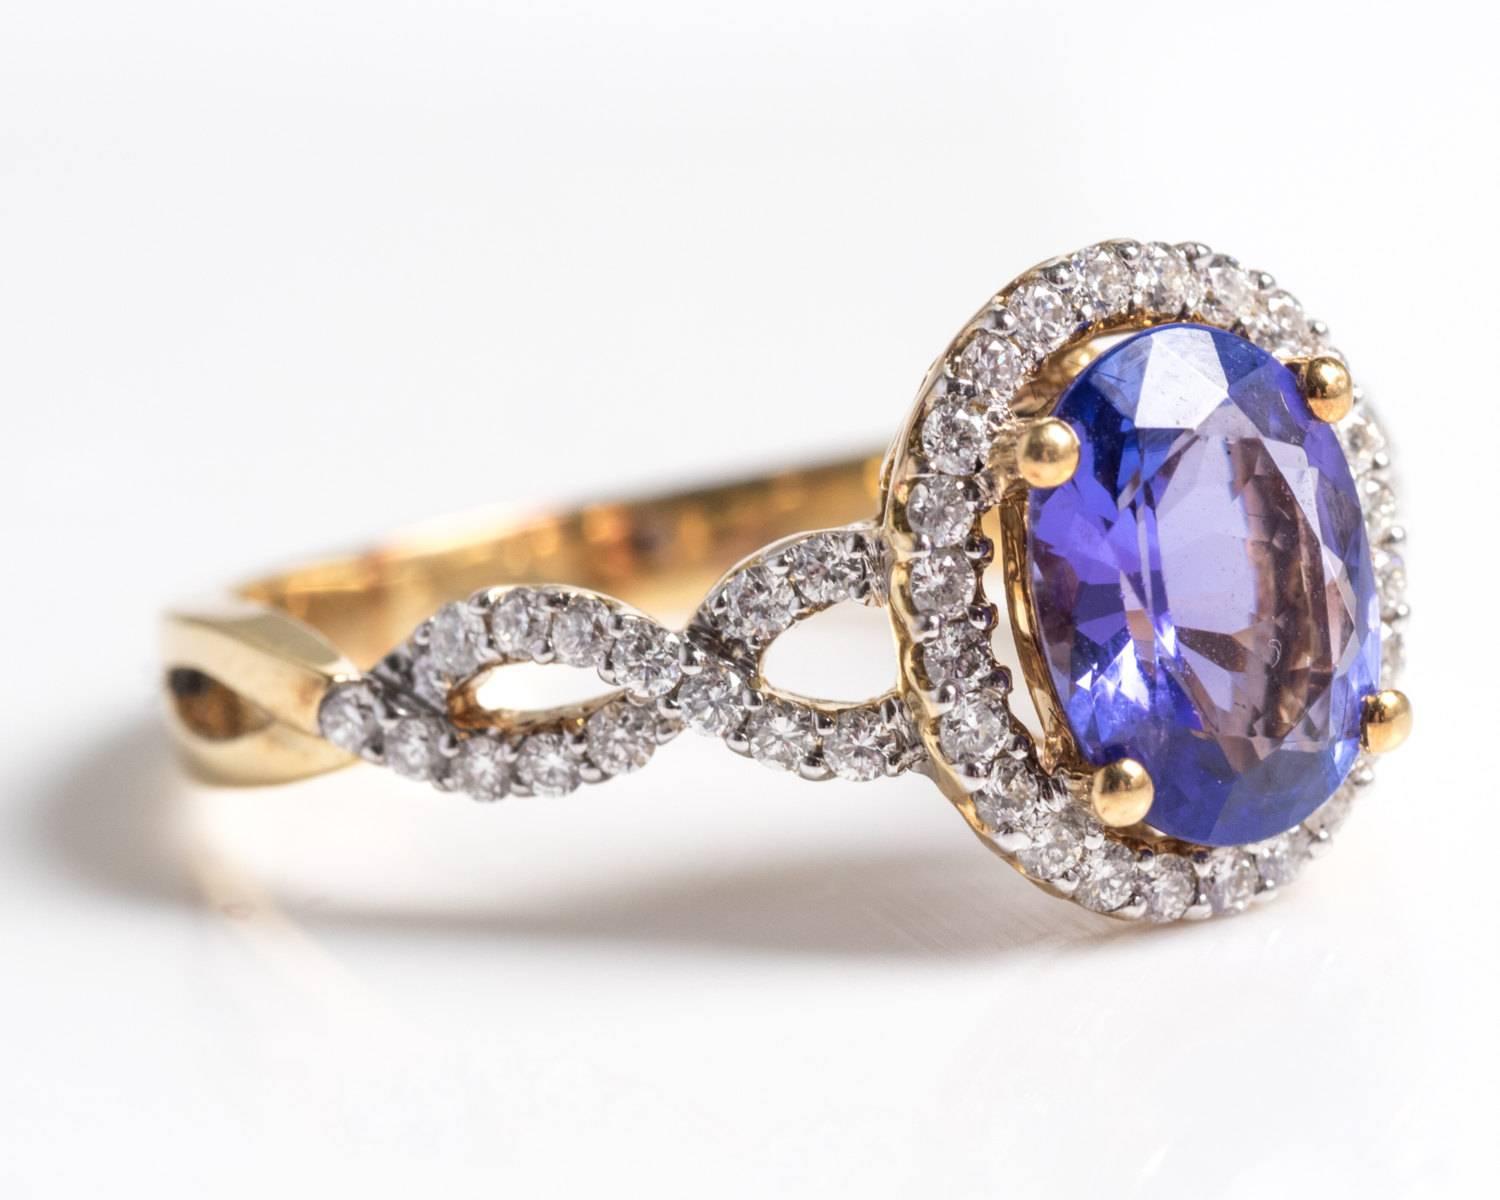 This tanzanite ring is beaming with color and sophistication. 
This bright purple oval cut tanzanite is mounted in its four-prong yellow gold frame. There is a halo of twenty-four diamonds surrounding the center stone. 

Underneath this cluster